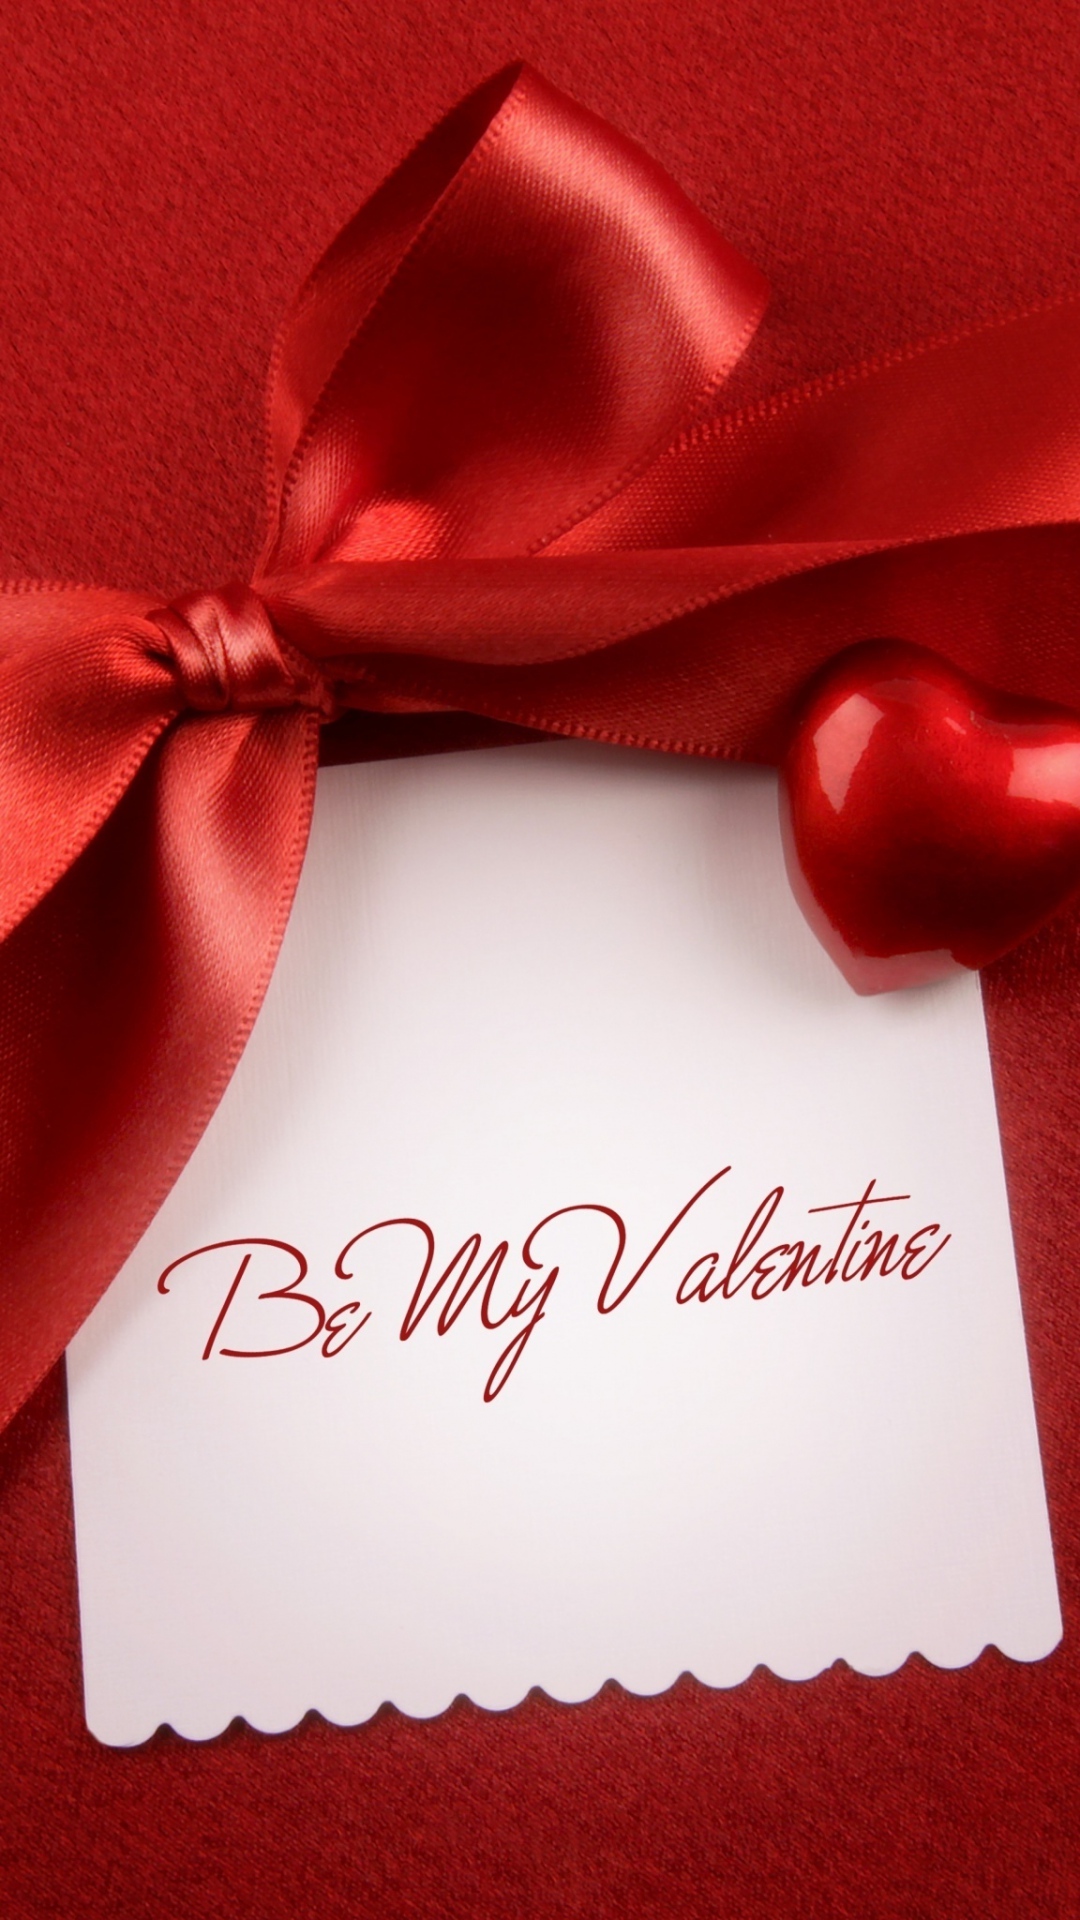 Be My Valentine Android wallpaper